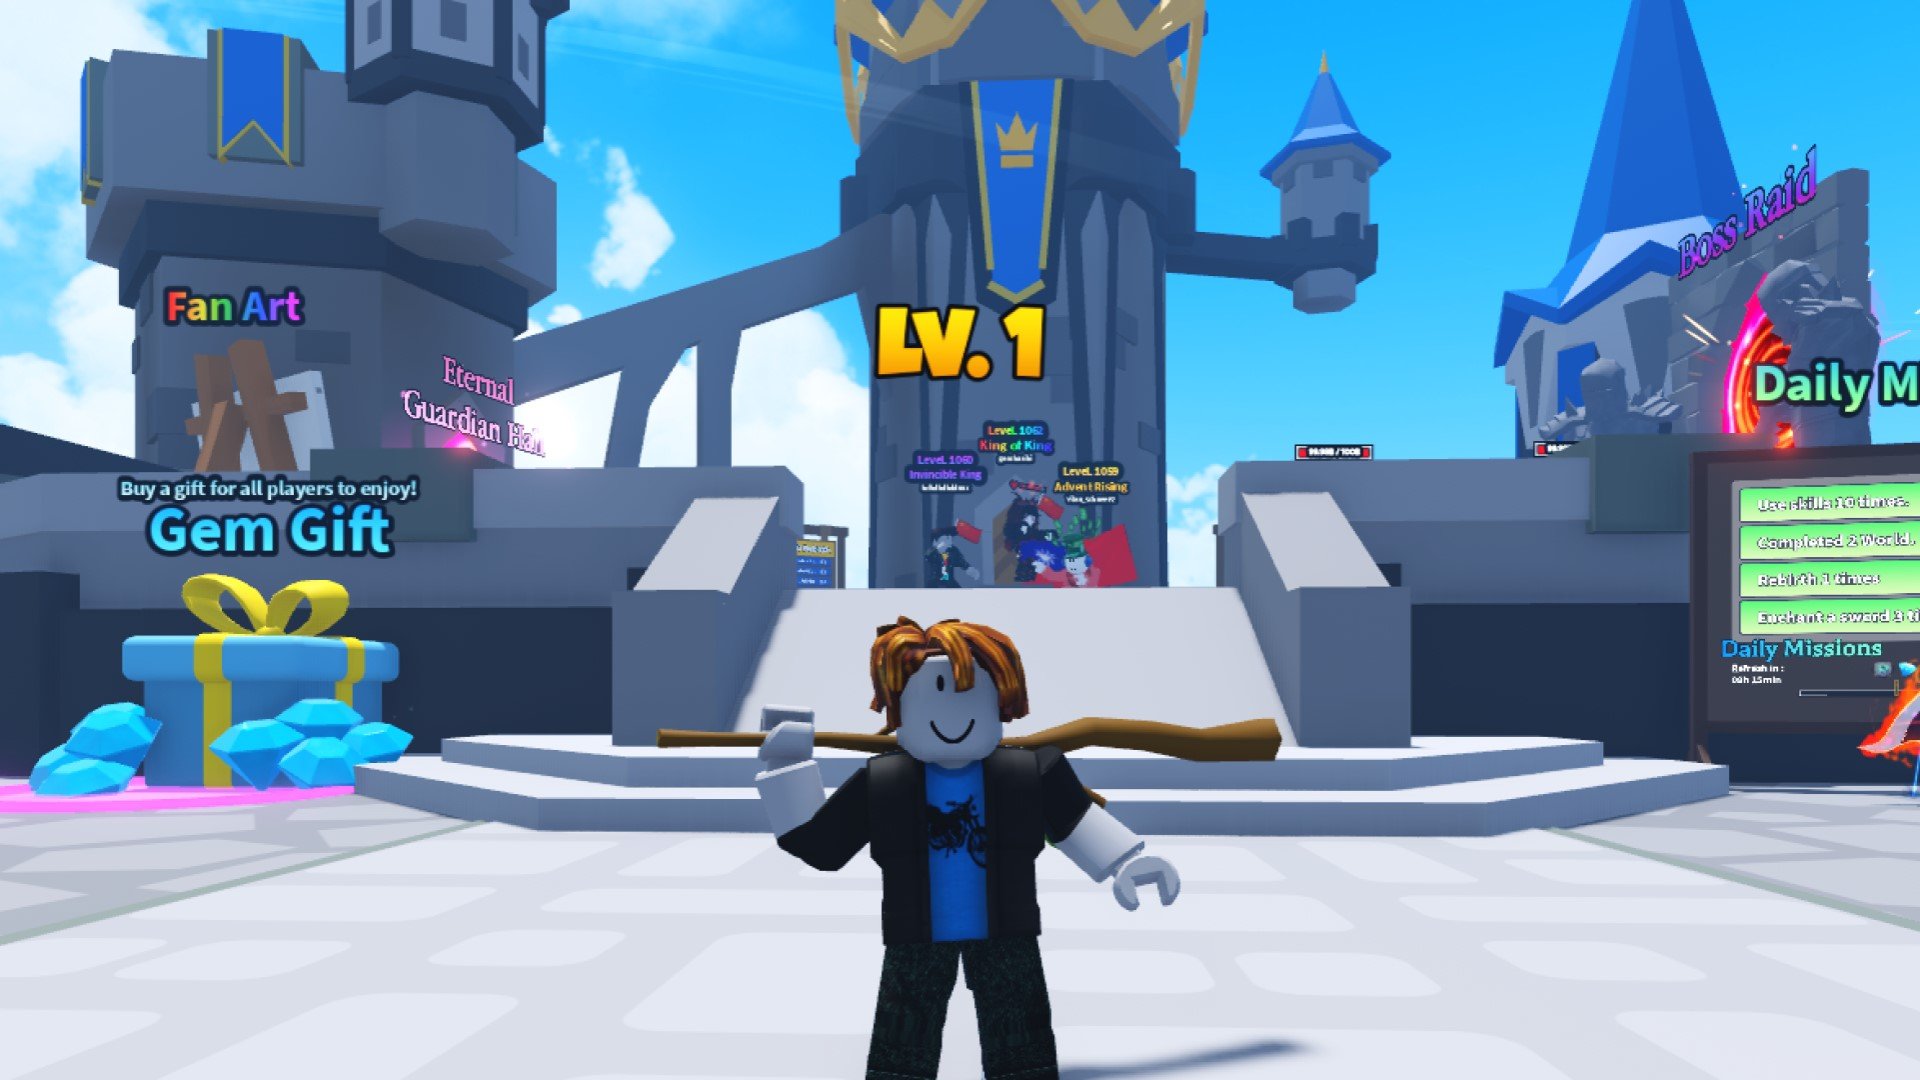 A level 1 character from the Roblox game Sword Warriors. He has ginger hair and carries a stick. In the background, an impressive castle looms overhead.